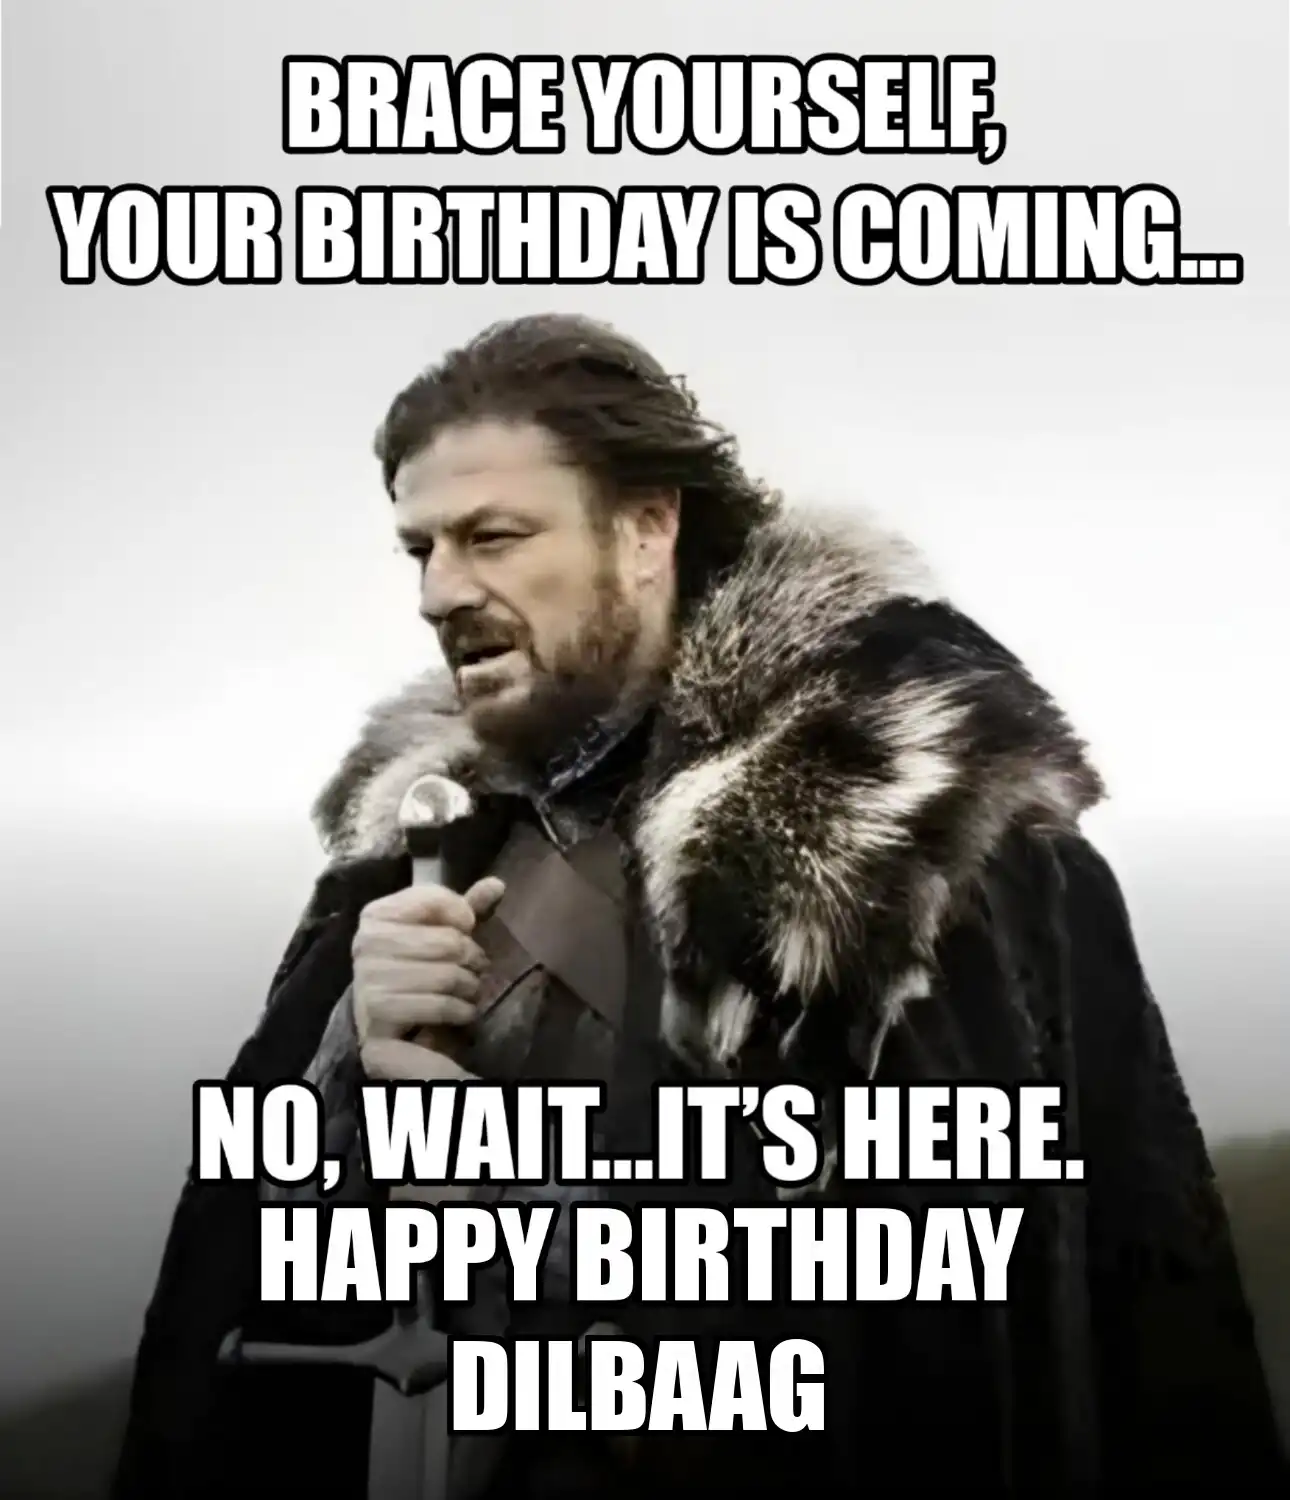 Happy Birthday Dilbaag Brace Yourself Your Birthday Is Coming Meme